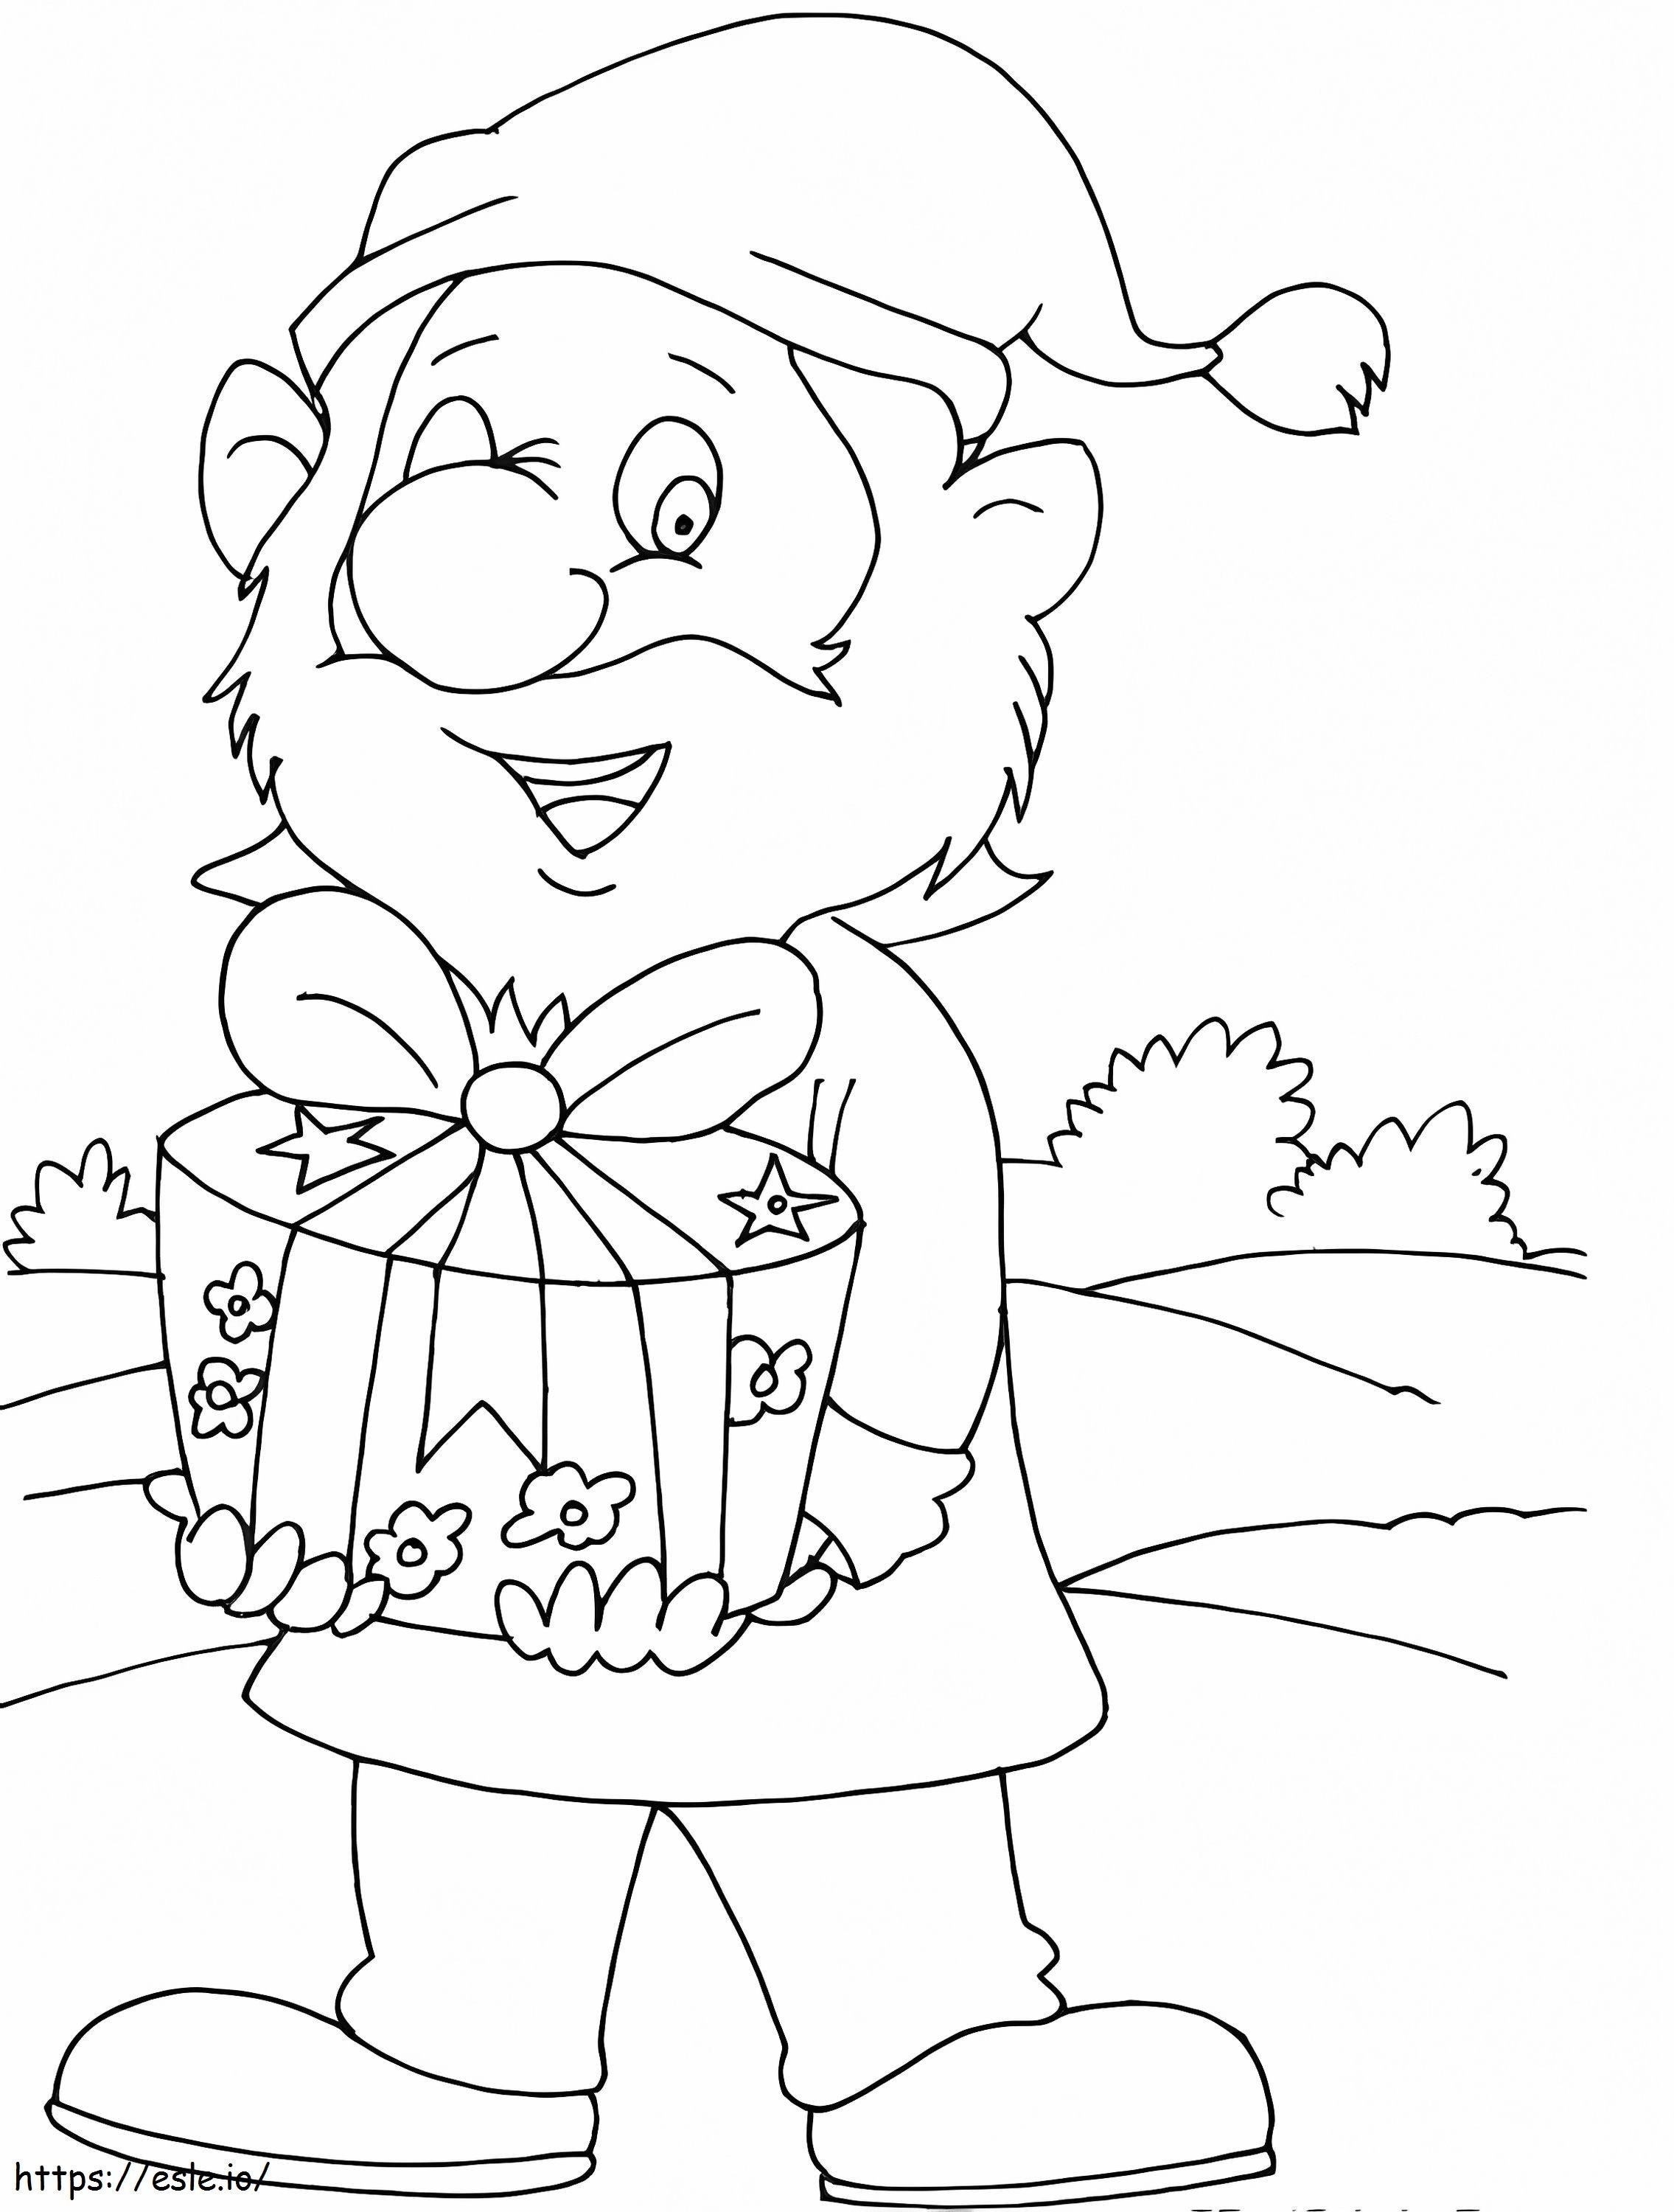 Dwarf And Gift E1649063684152 coloring page